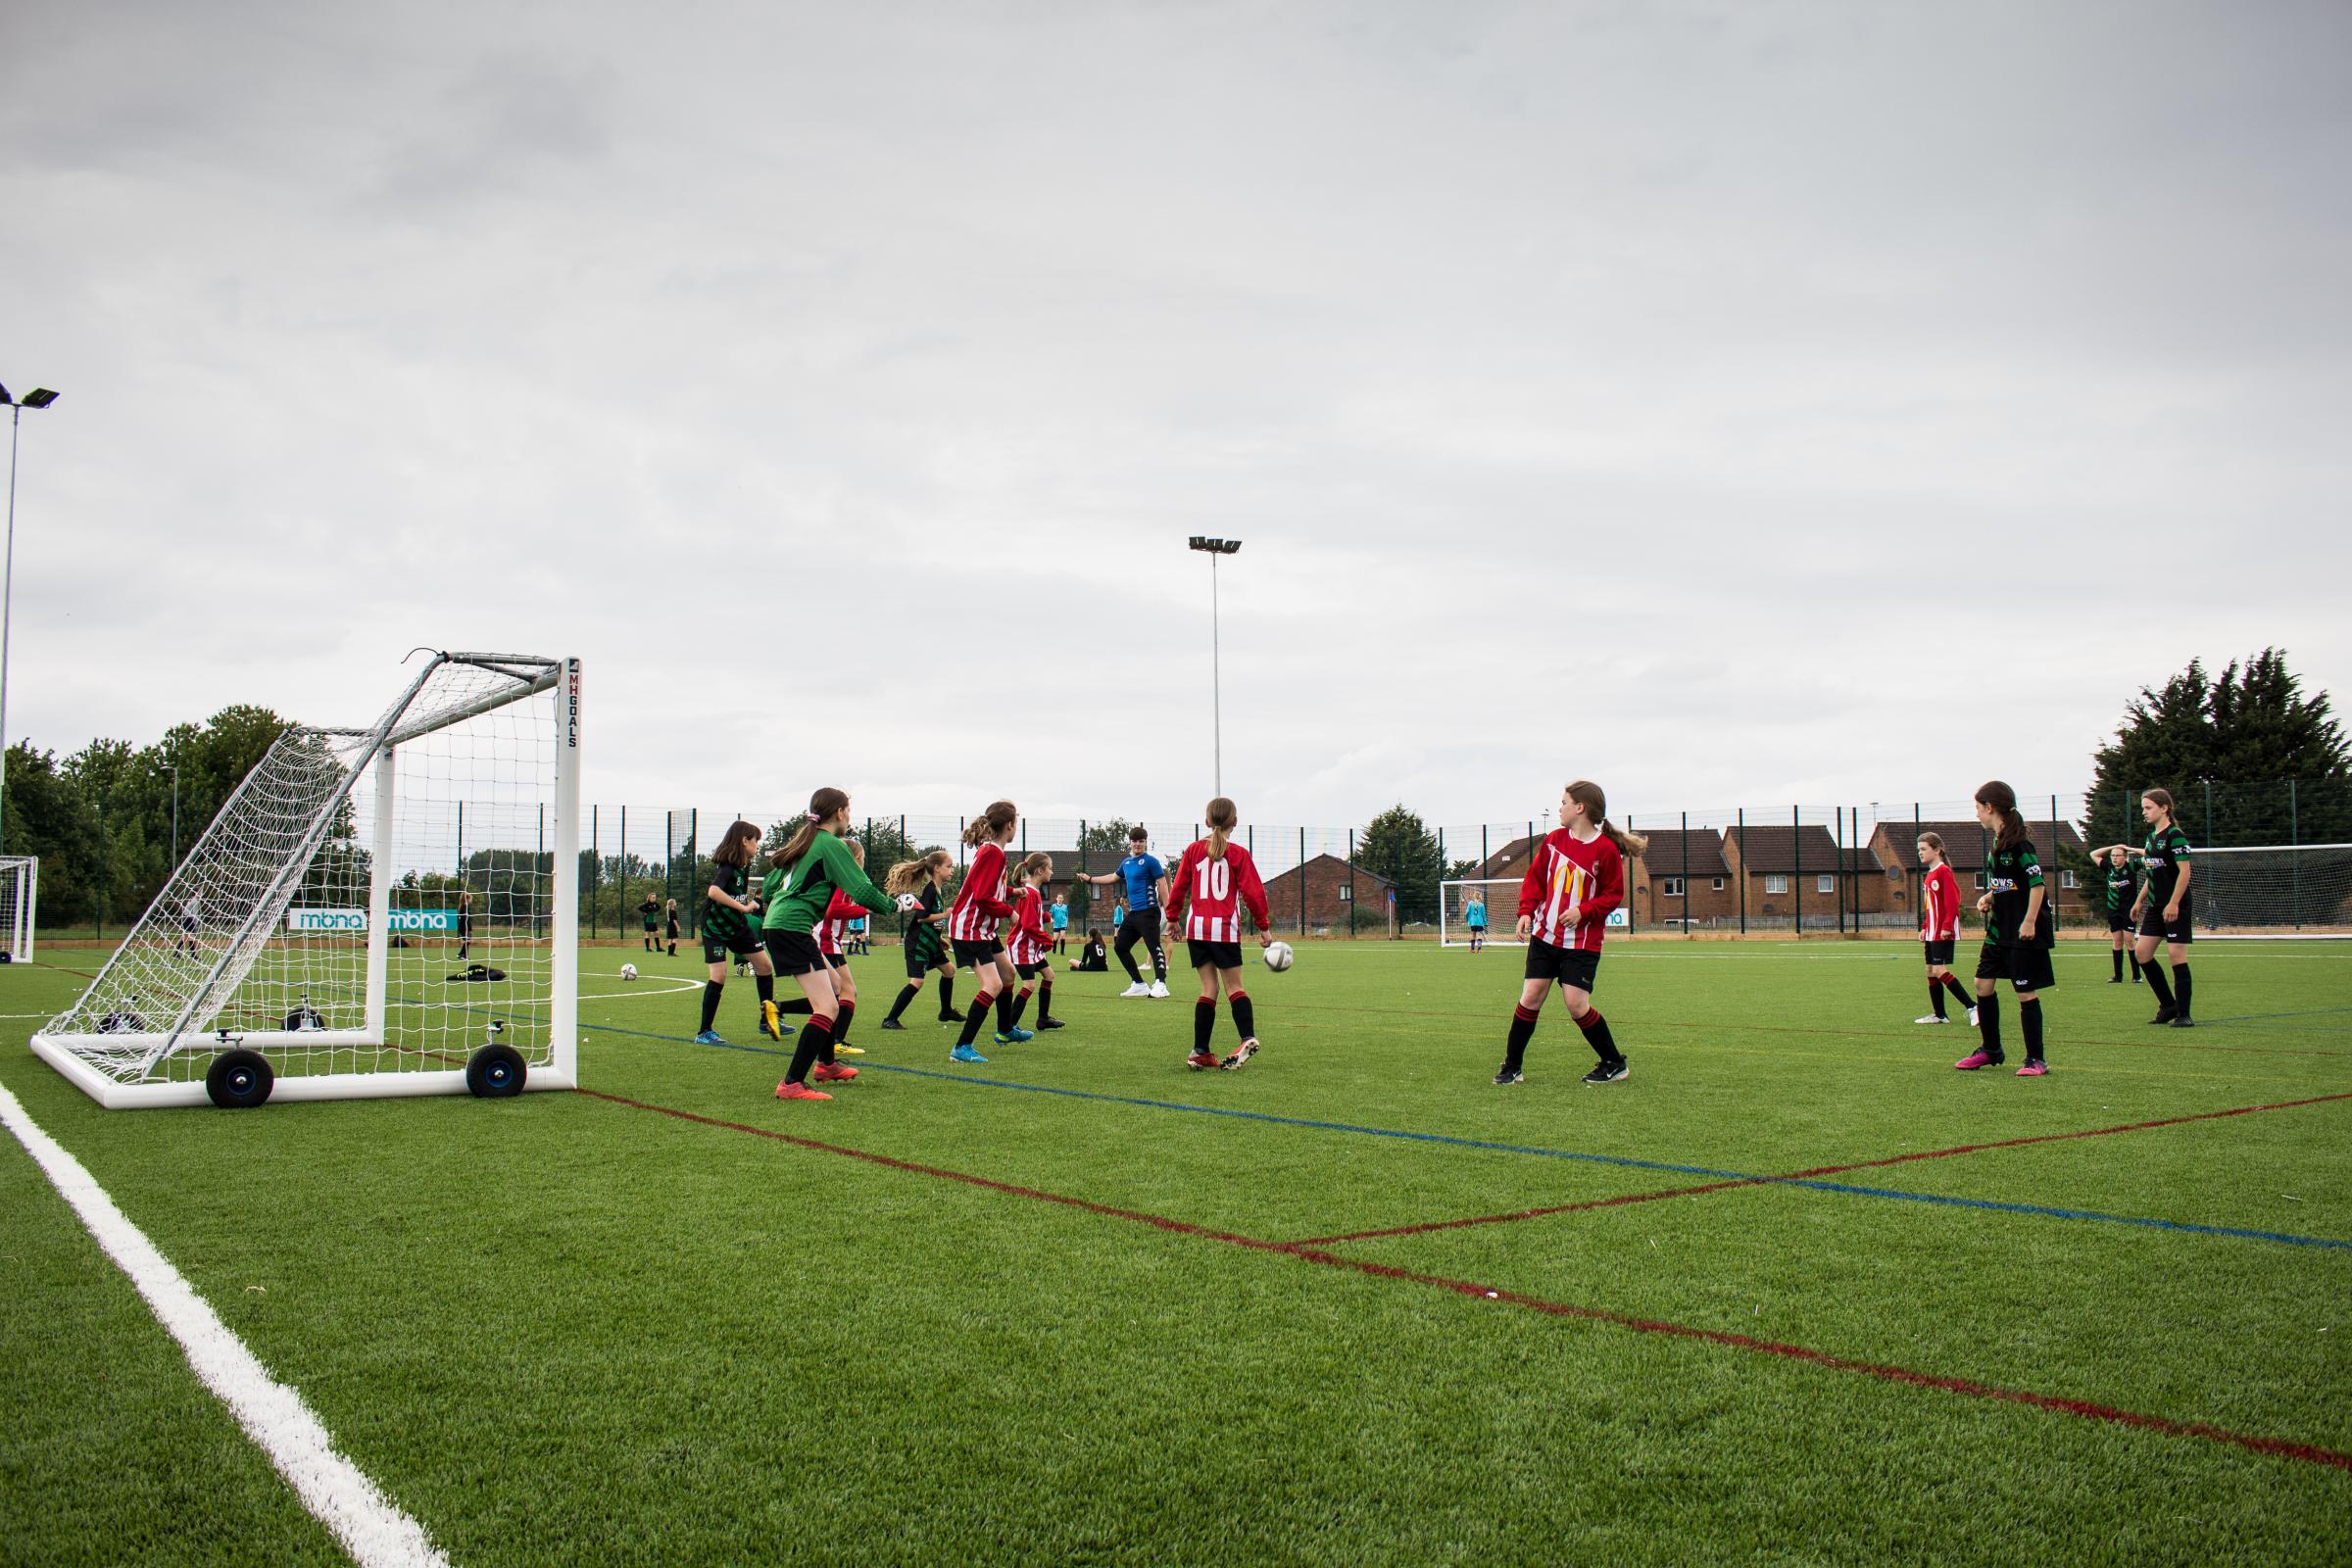 The official opening of the King George V sports hub saw children from eight Chester primary schools taking part in a girls’ football tournament on the new 3G pitch.